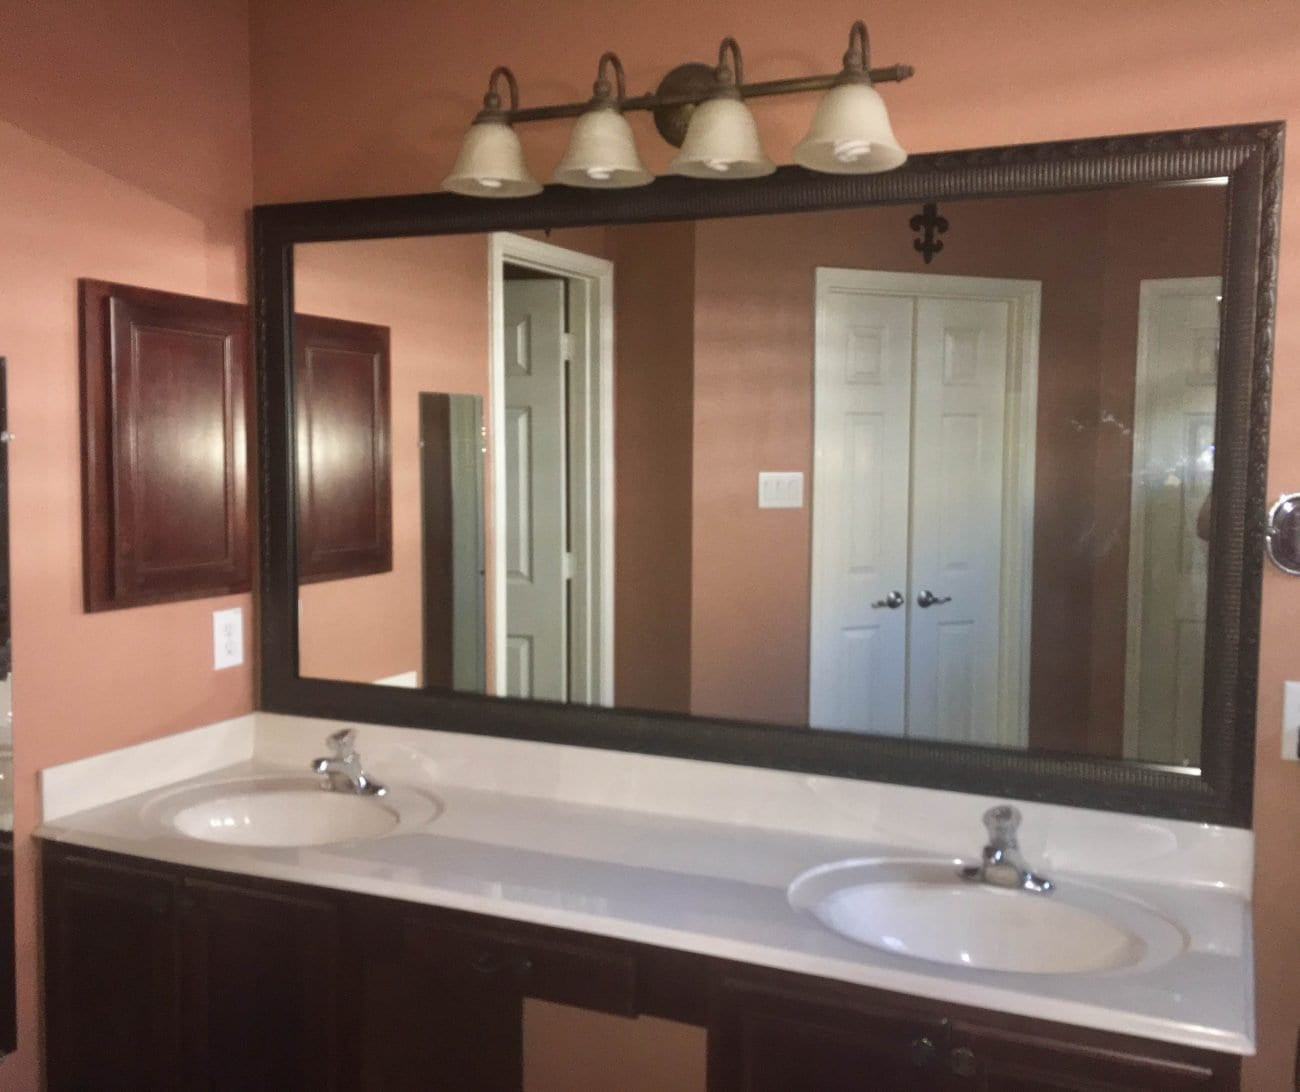 Bathroom Mirrors With Frames
 "Amazing" Master Bathroom Makeover